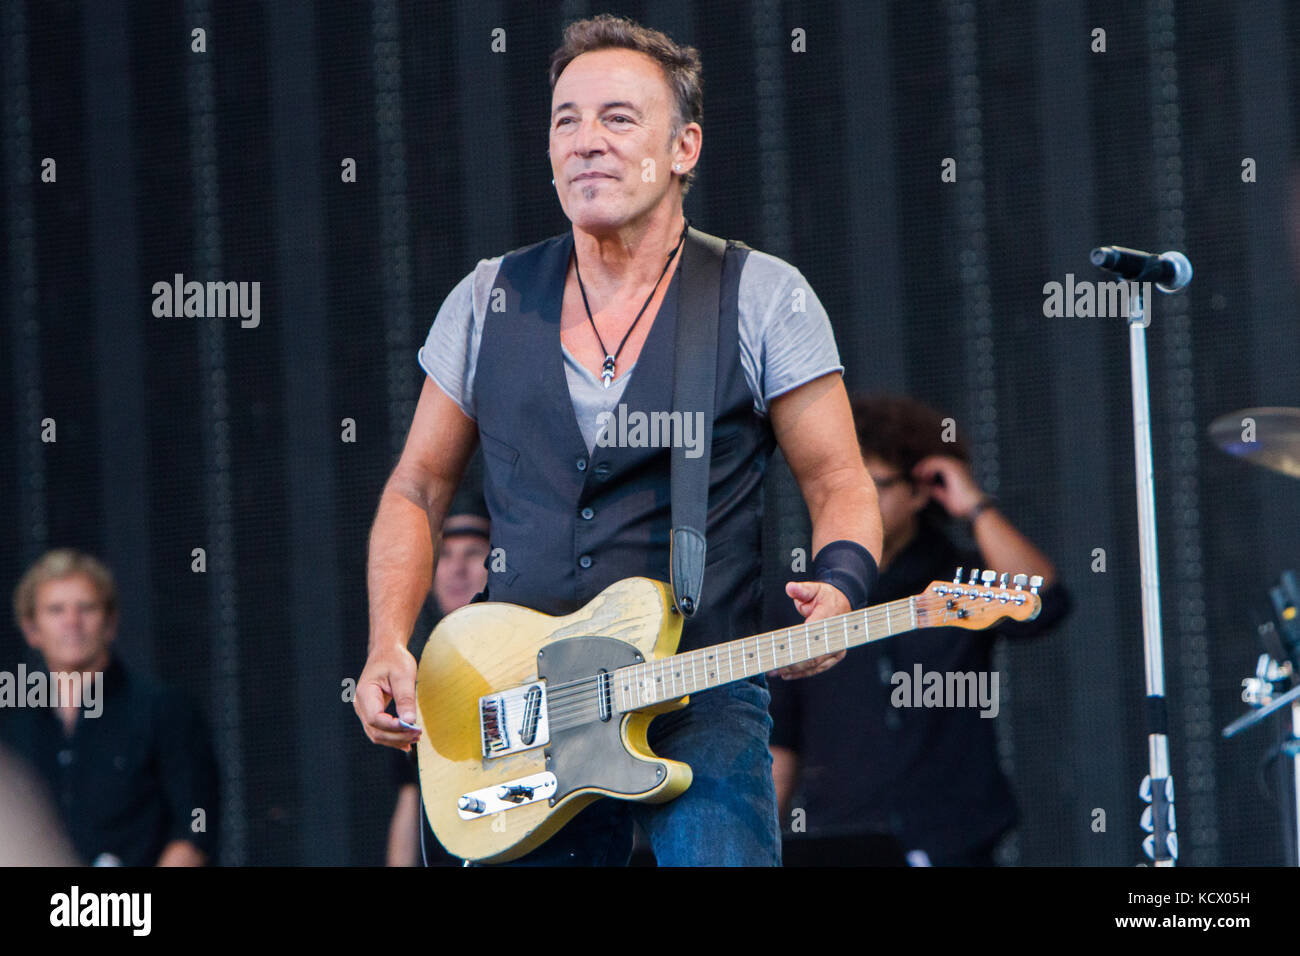 Zurich Switzerland. 09th July 2012. Bruce Springsteen performs live on  stage at Stadion Letzigrund during the "Wrencking Ball Tour Stock Photo -  Alamy